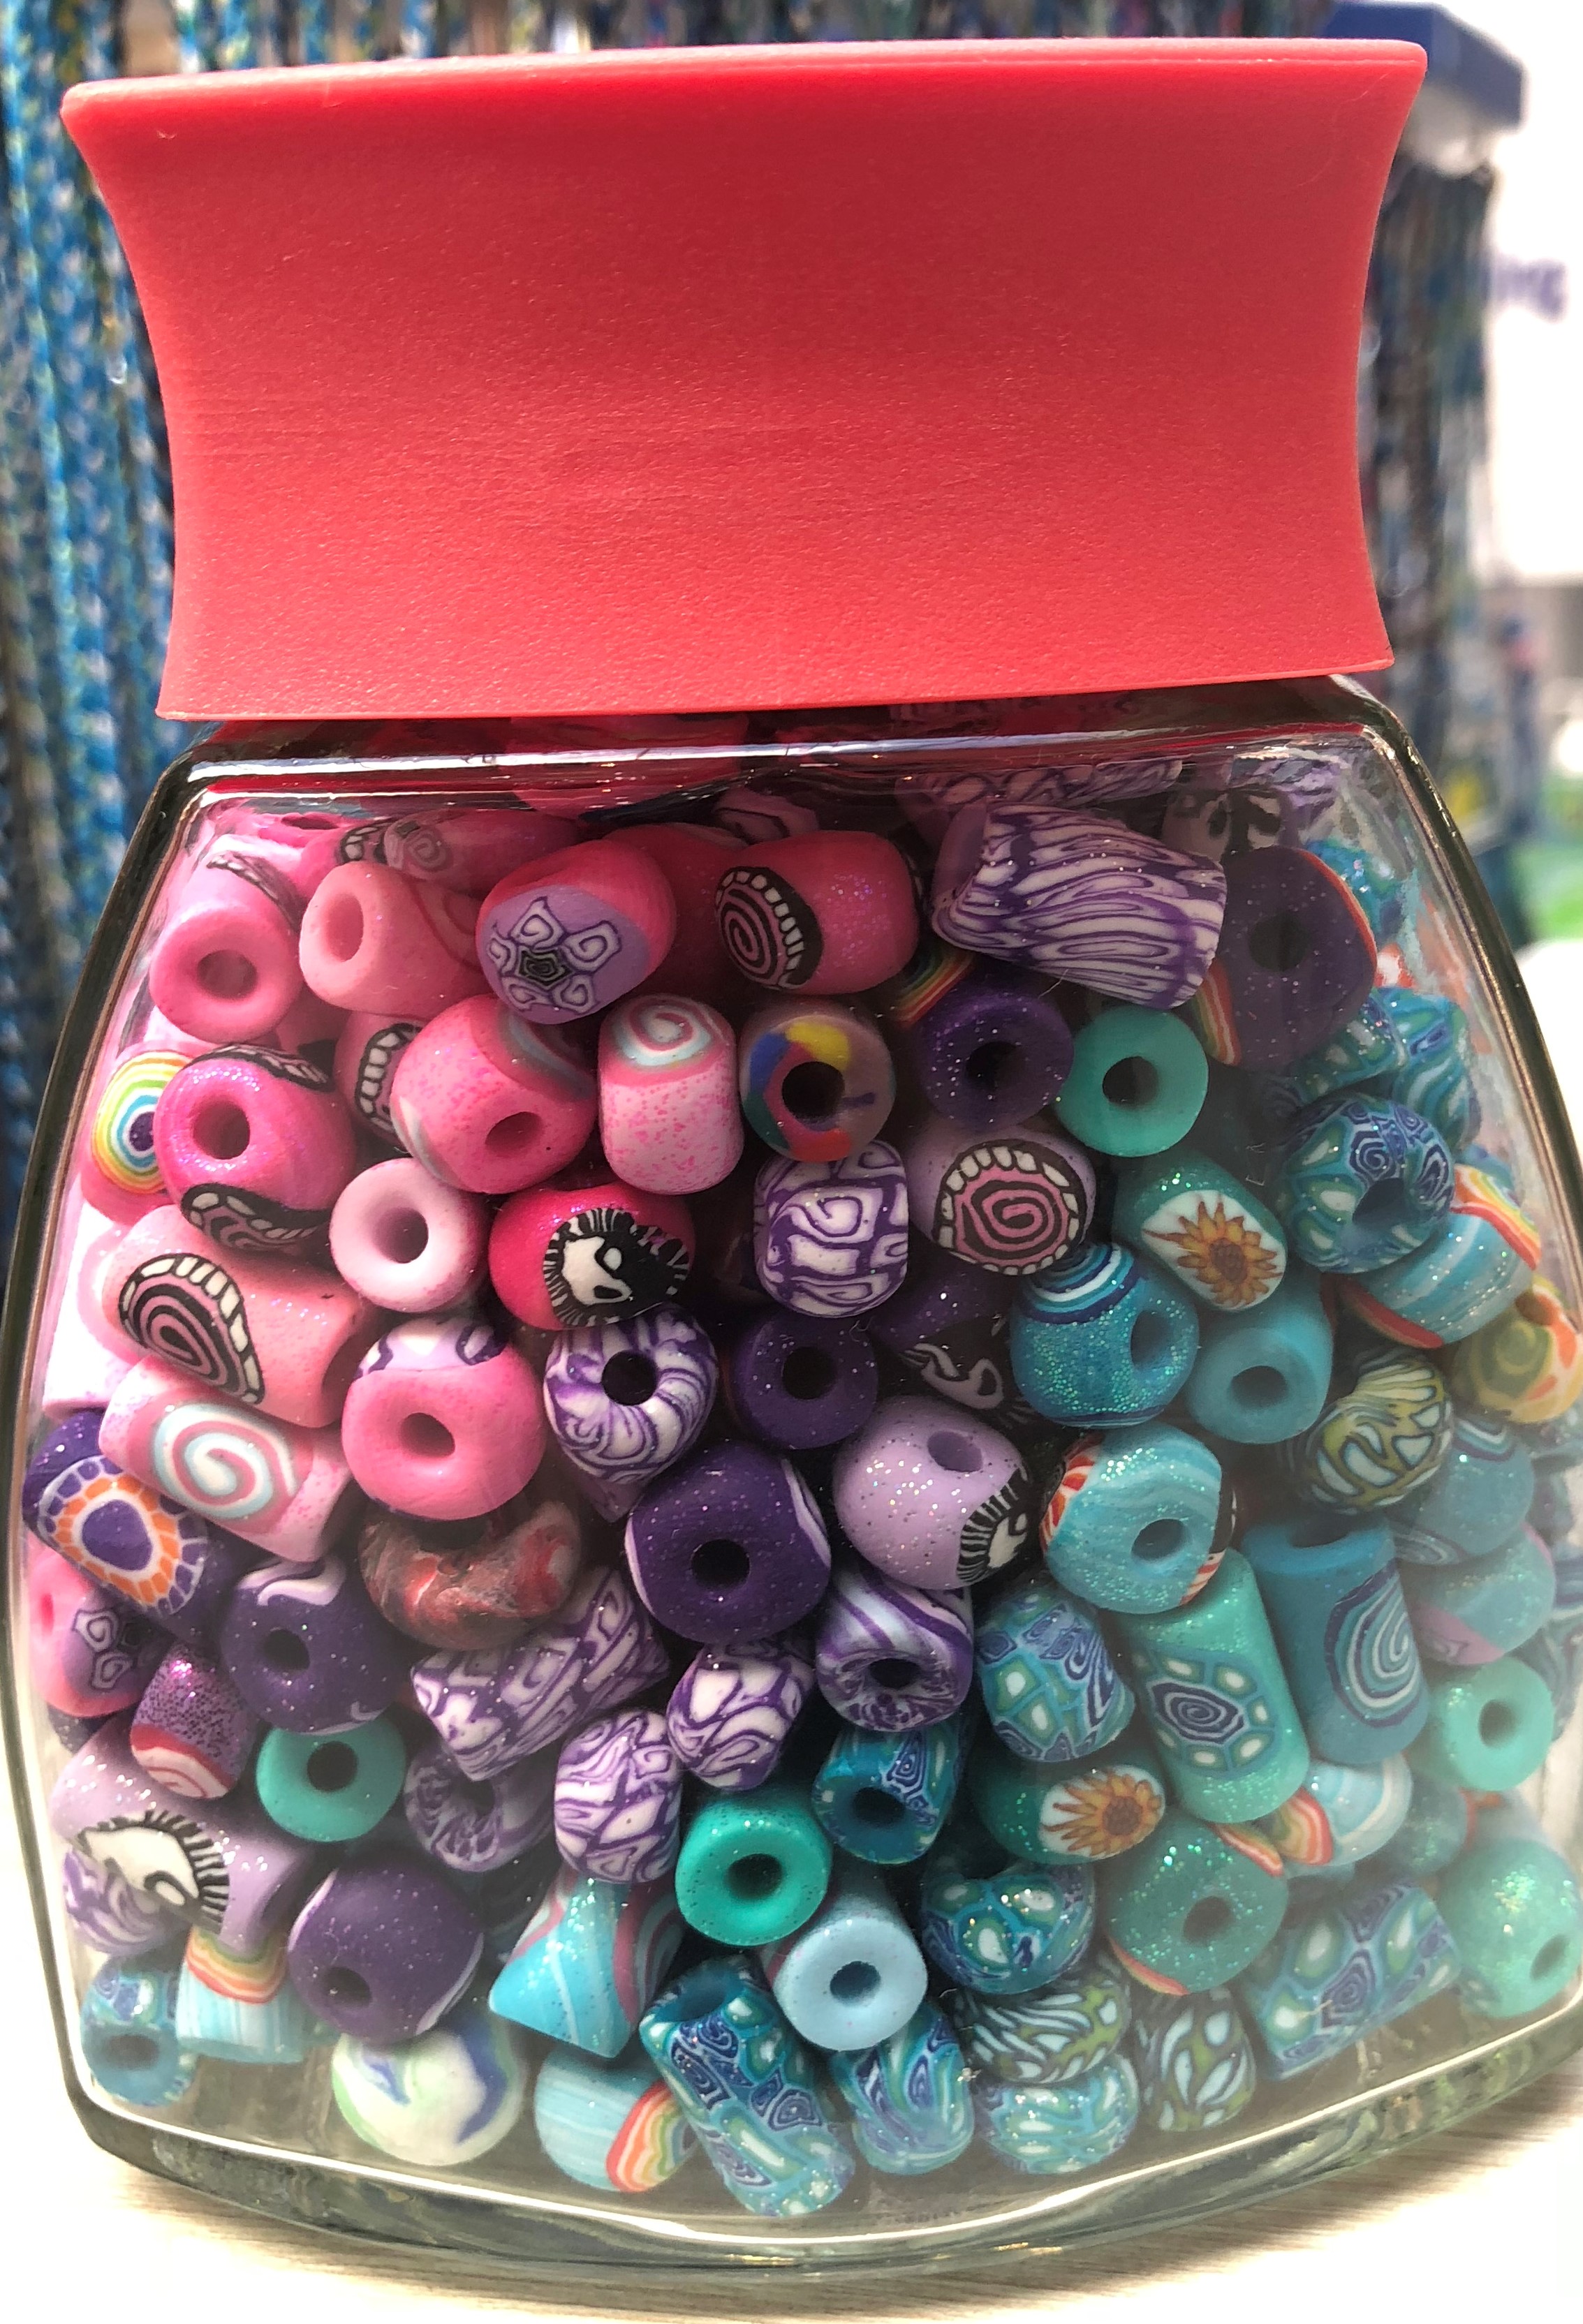 Guess how many beads in the jar?